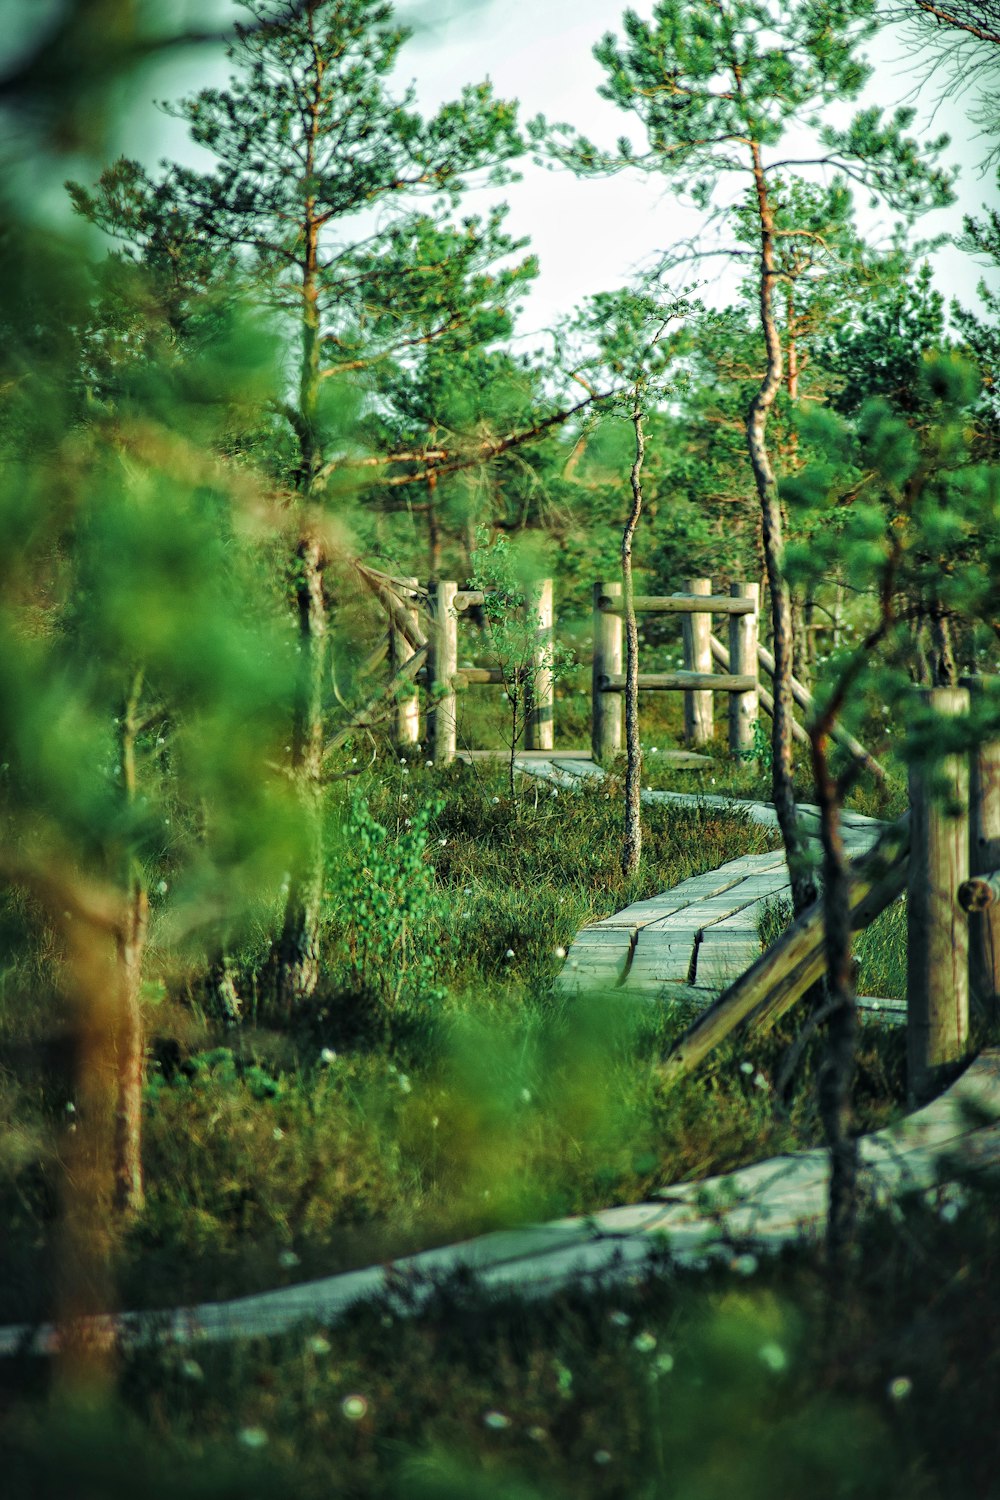 a wooden walkway through a forest filled with lots of trees